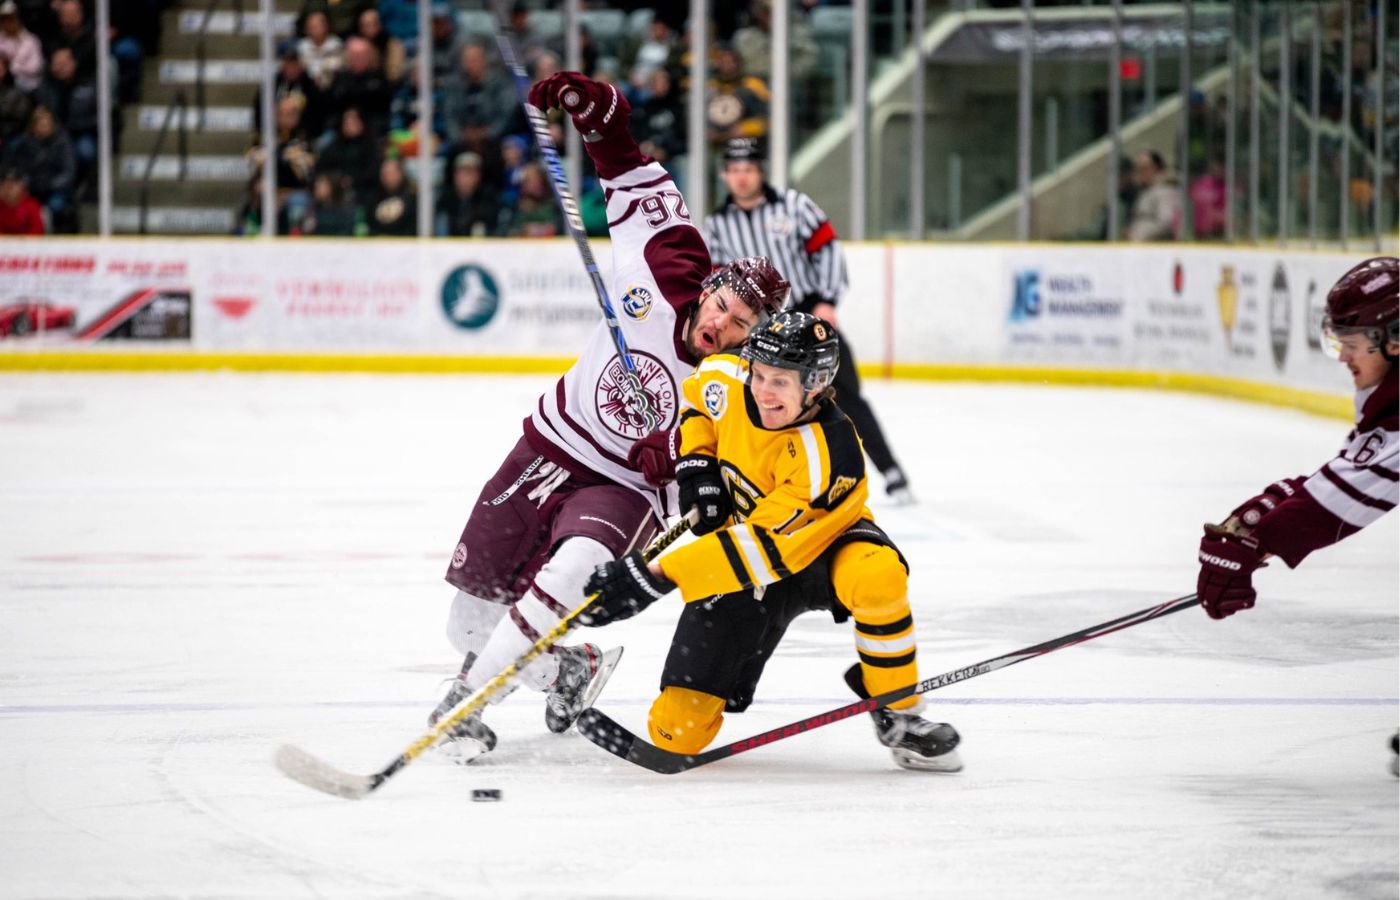 SJHL: The rough and tough one of the junior hockey leagues?